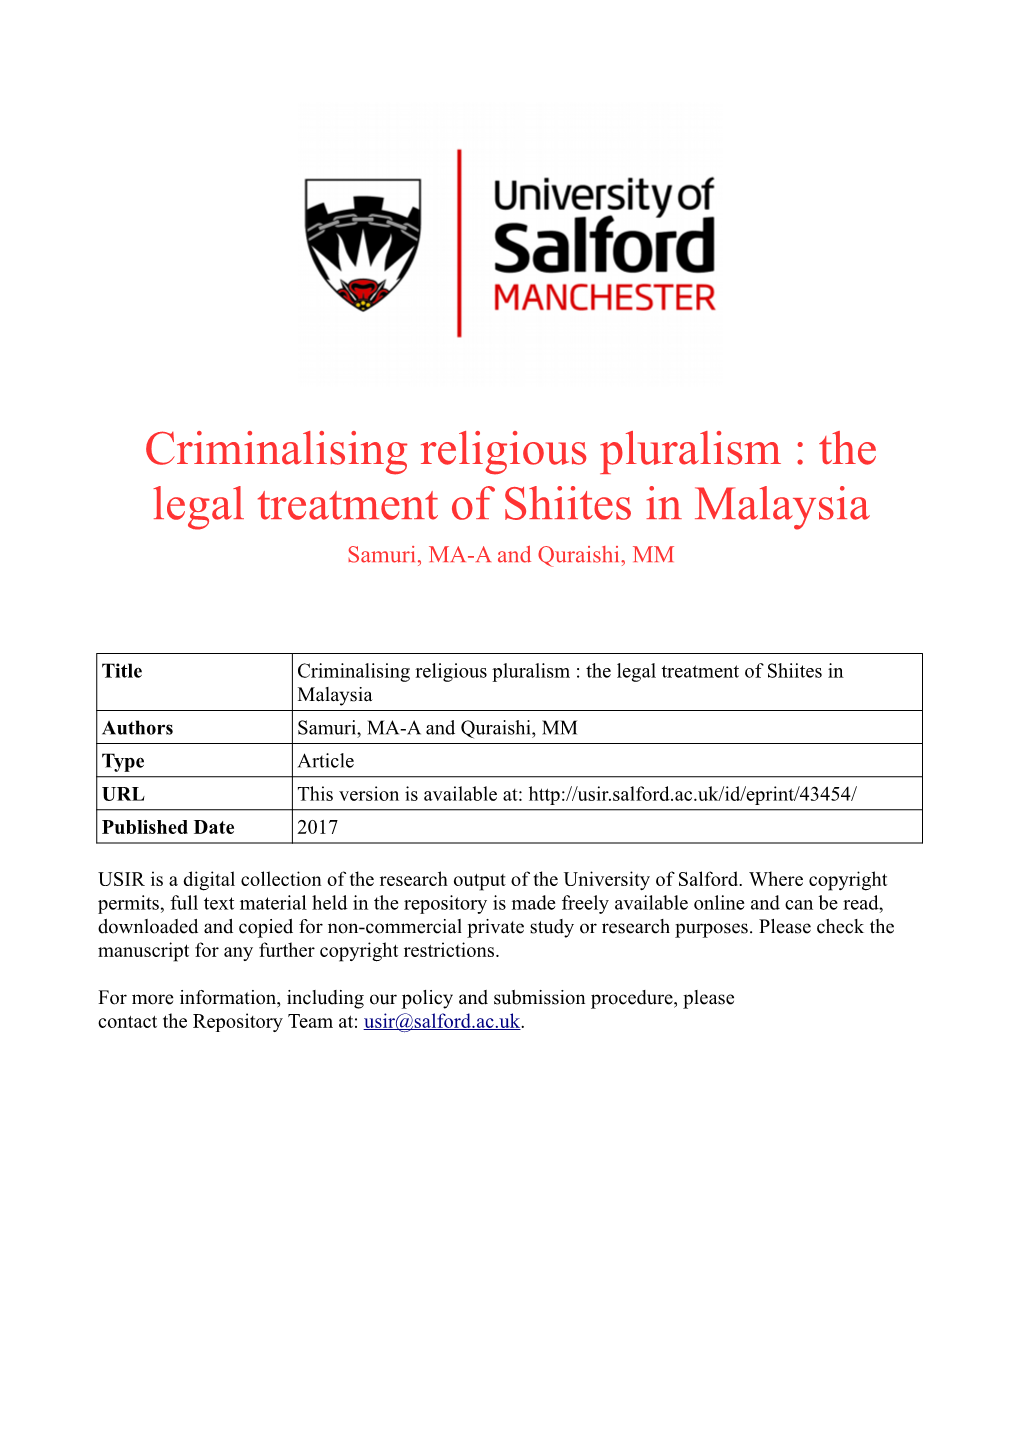 Criminalising Religious Pluralism : the Legal Treatment of Shiites in Malaysia Samuri, MA-A and Quraishi, MM